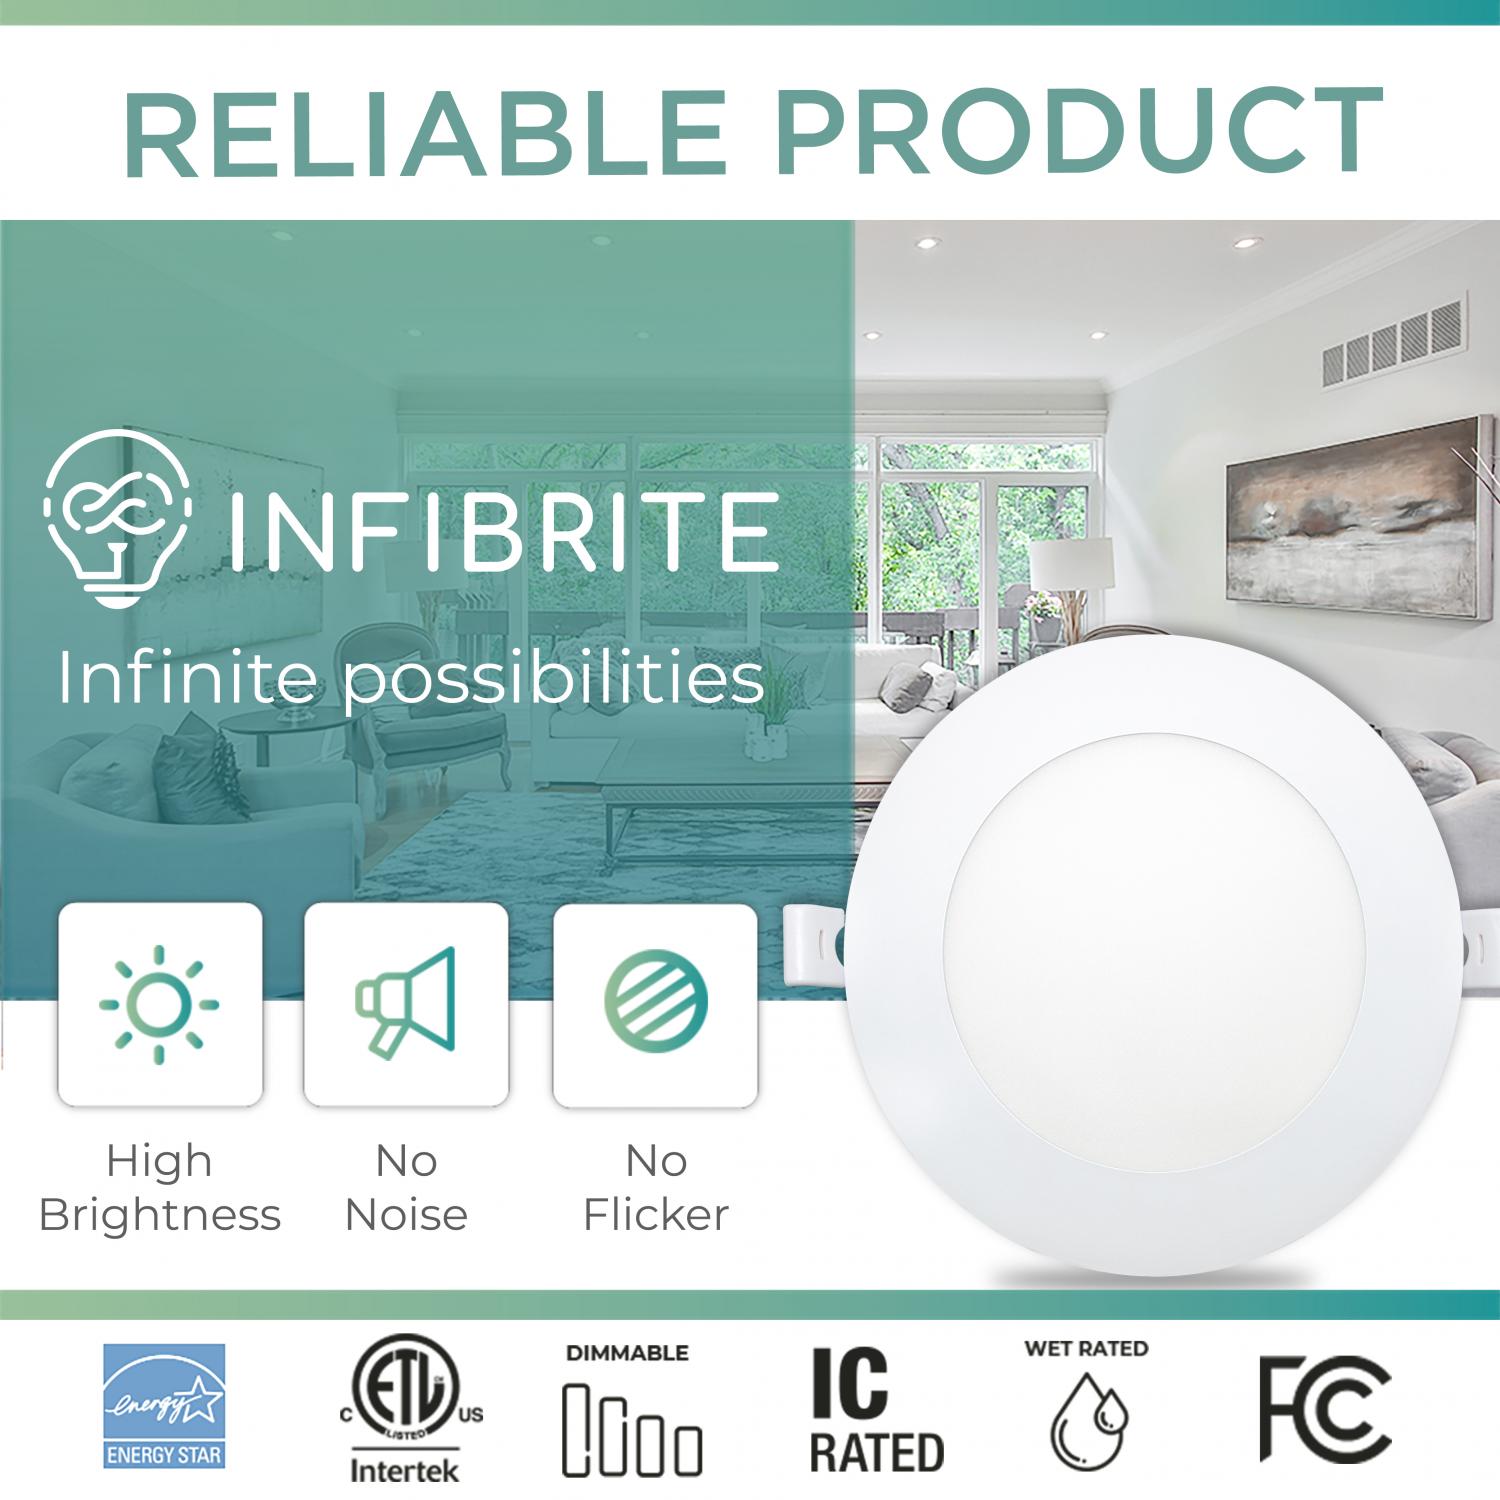 Infibrite 4 Inch 3000K Warm White 9W 750 LM Ultra-Slim LED Ceiling Light with Junction Box, Flush Mount, Dimmable, Fixture for Bedroom, Wet Rated for Bathroom, Easy Install, 75W Eqv, ETL & Energy Star, US Company (24 Pack)